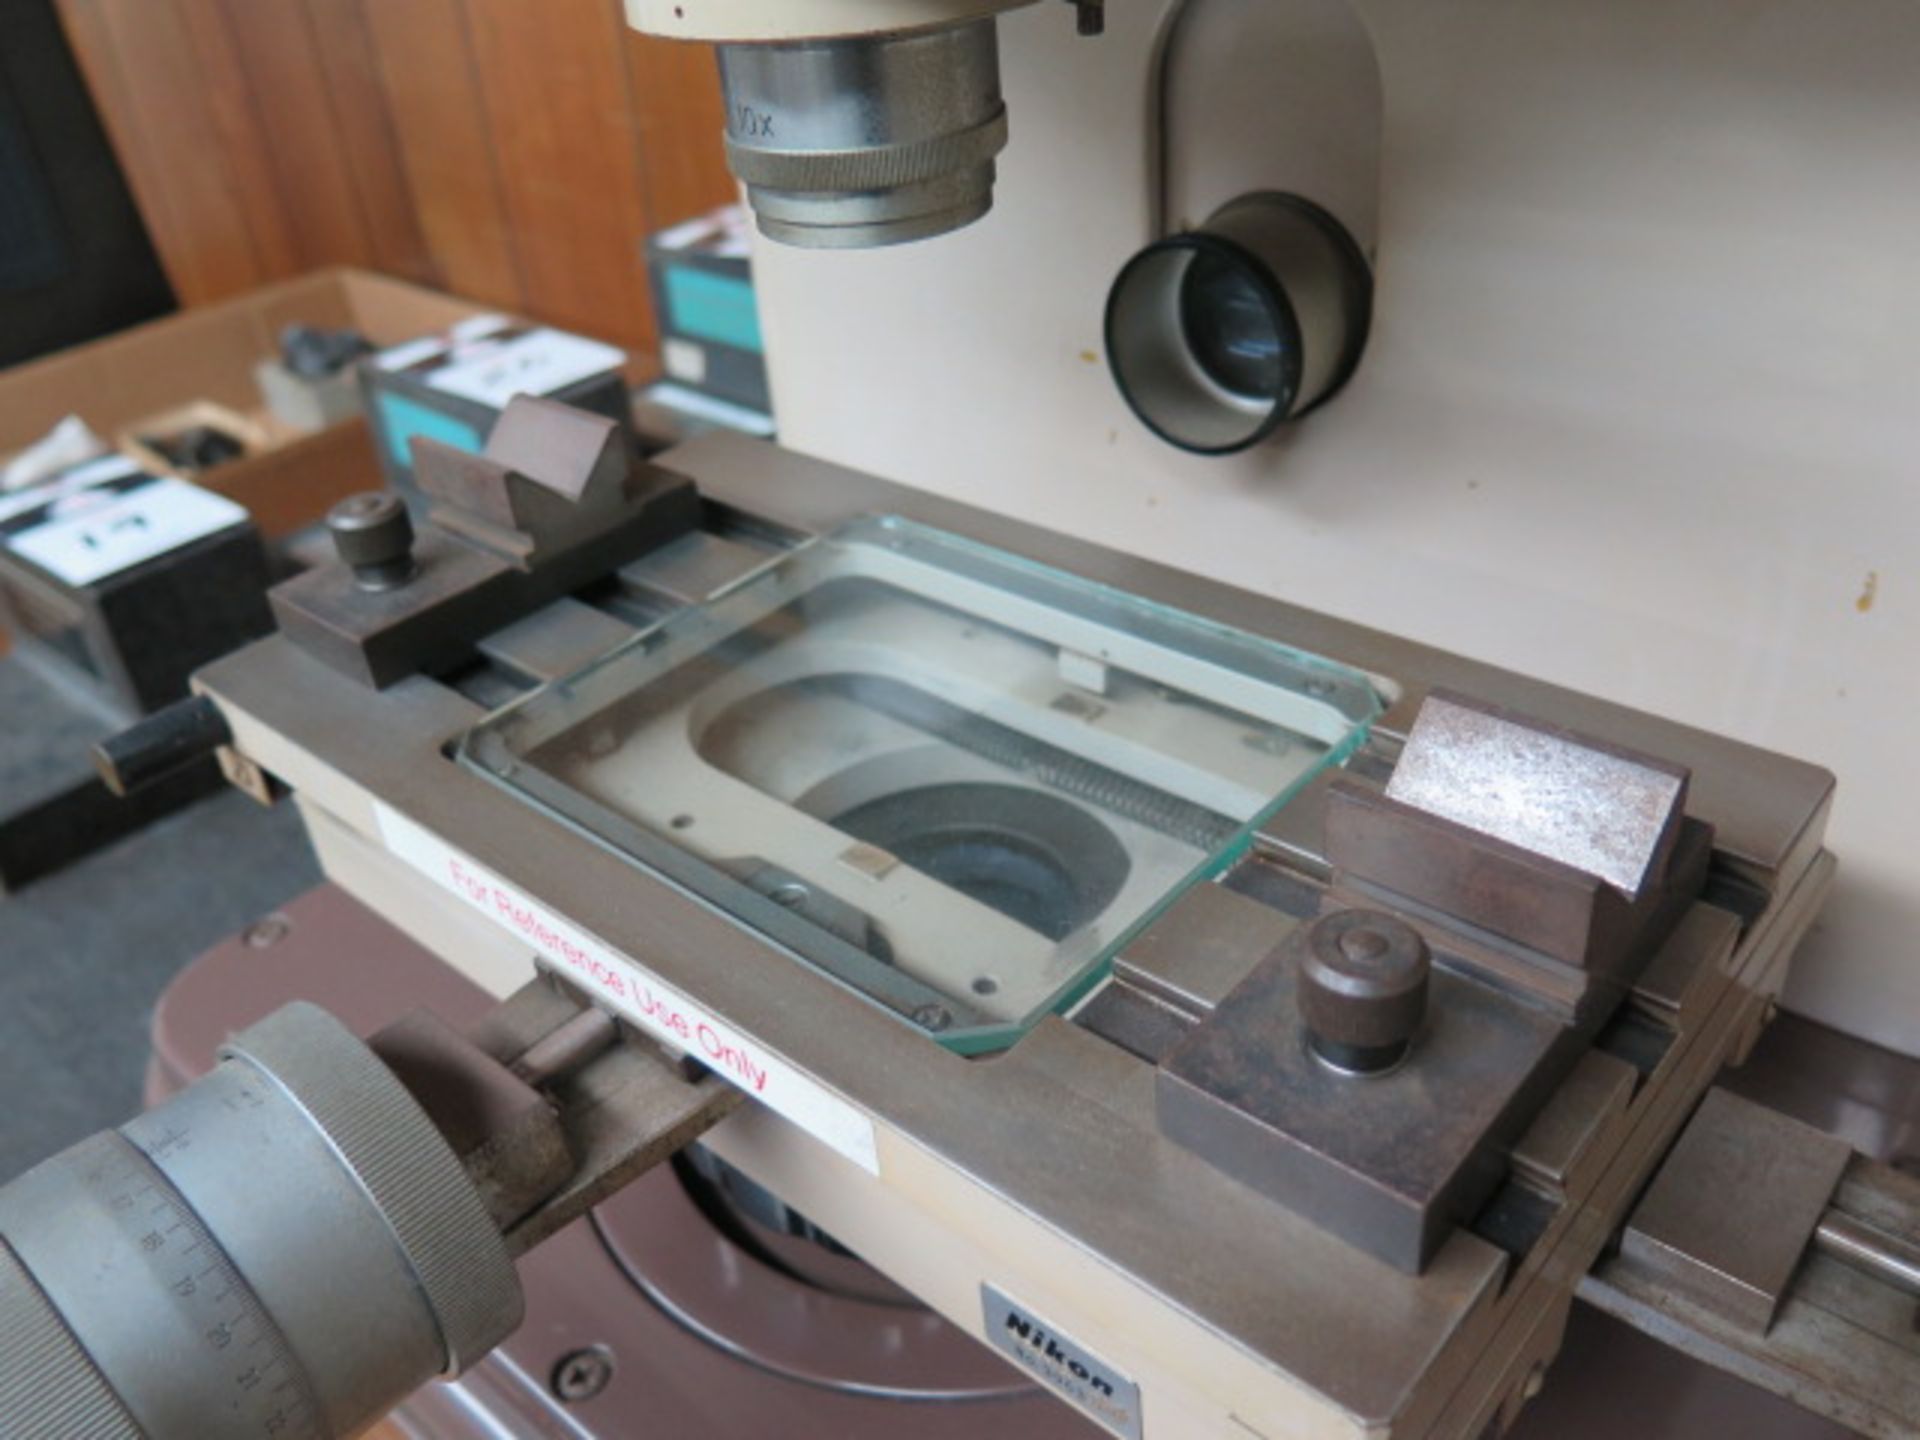 Nikon mdl. 6 12” Optical Comparator s/n 5001 w/ Surface and Profile Illumination (SOLD AS-IS - NO - Image 7 of 8